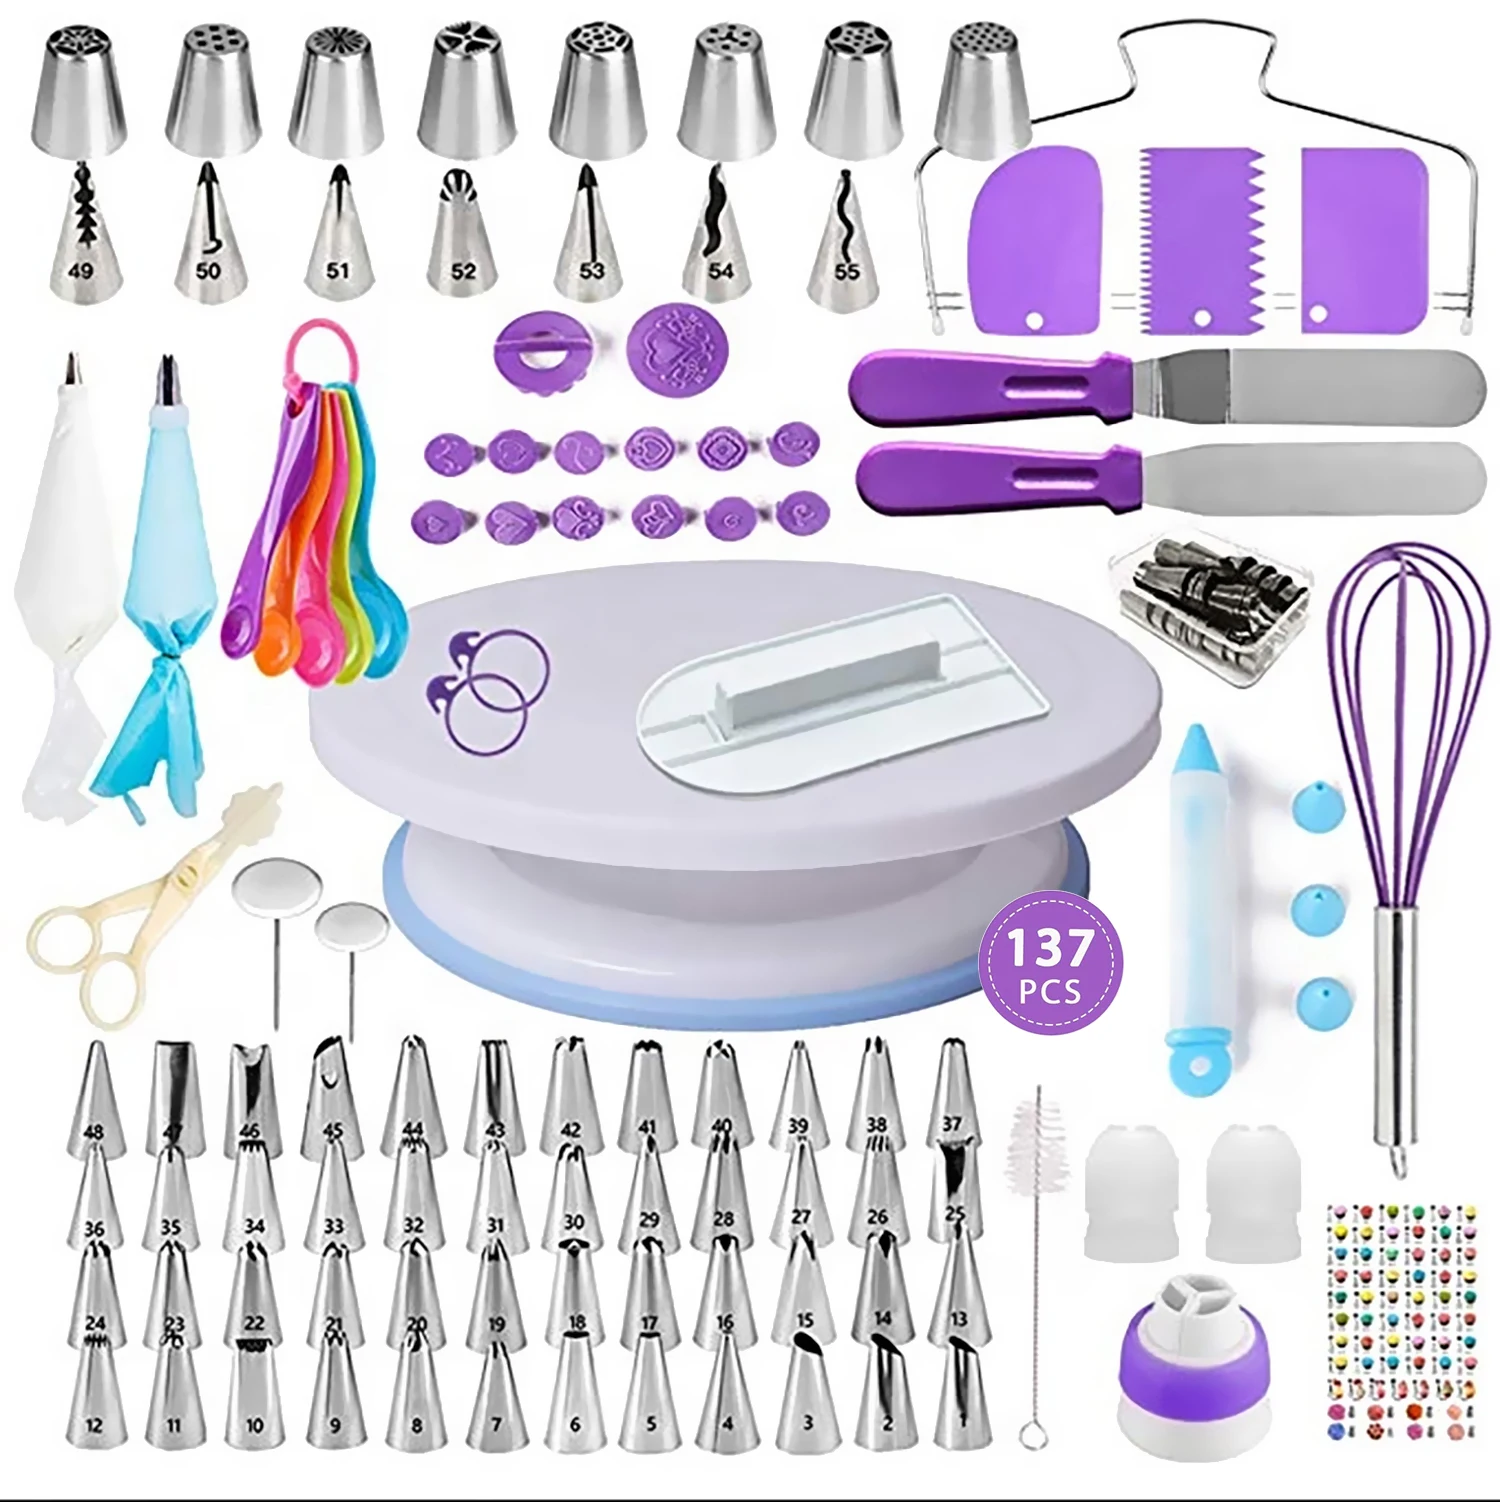 

137 Pcs Piping Bag Set Turntable Reposteria Pastry Baking Supplies Stand Cake Decoration Accessories, As the picture shows